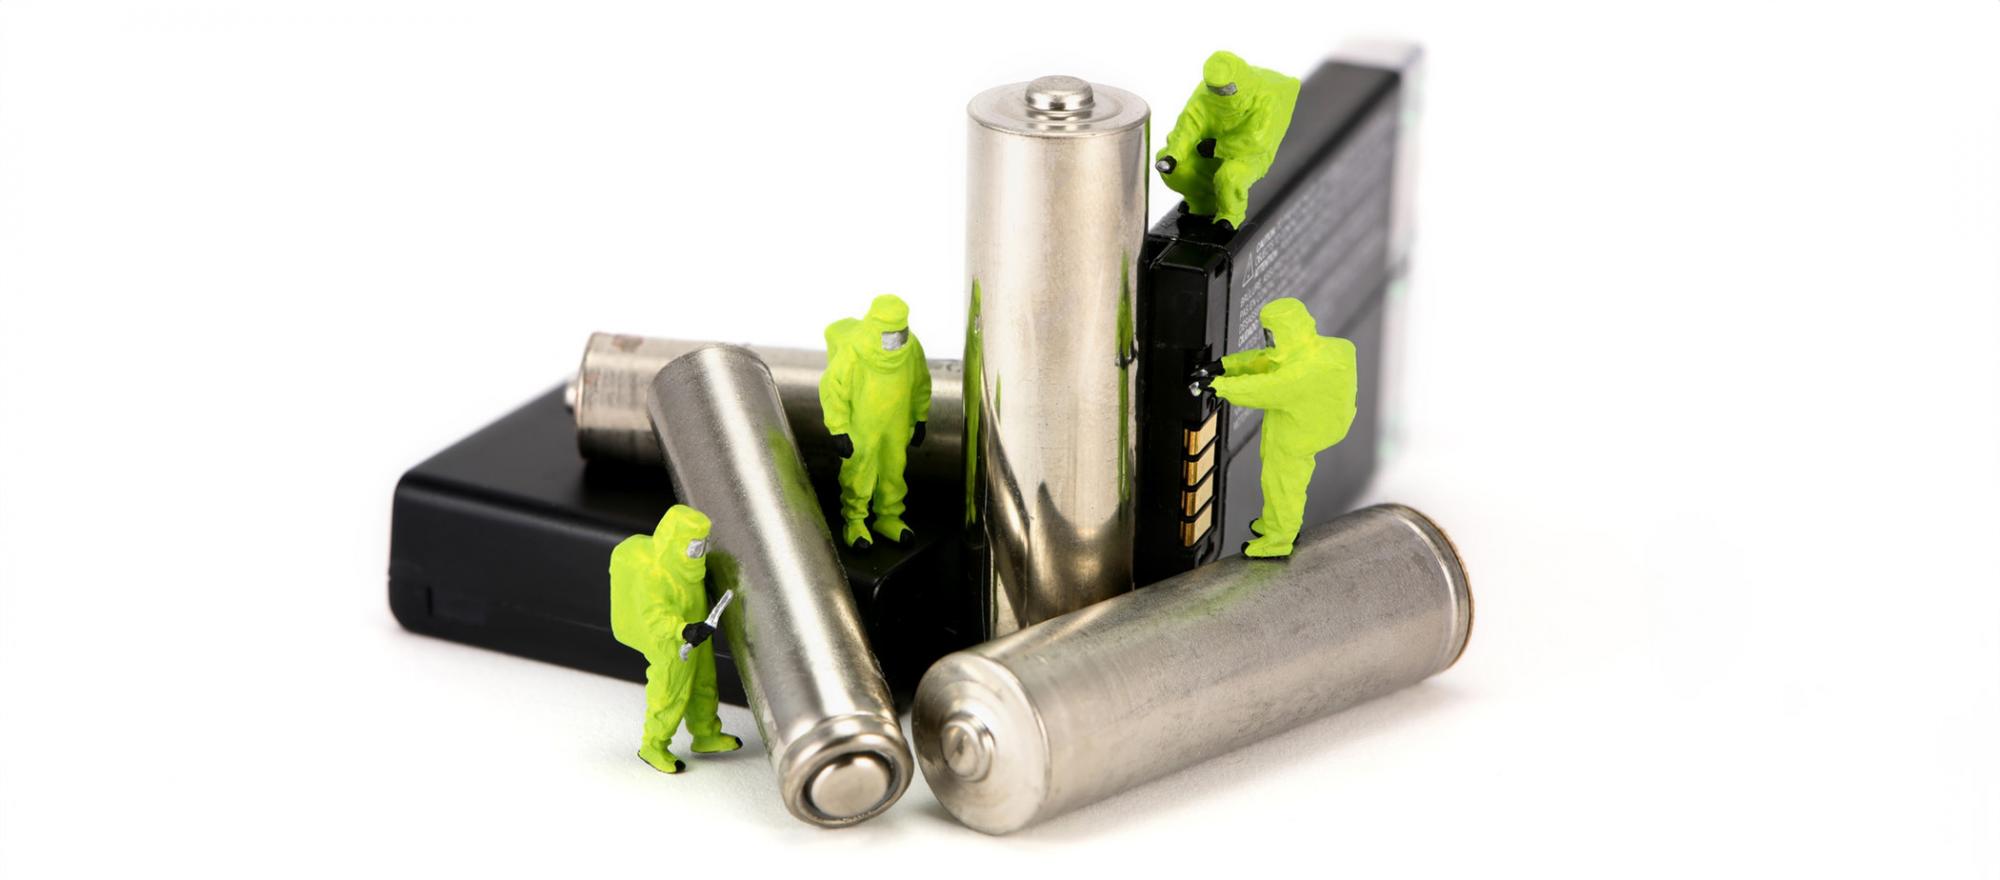 Loose lithium batteries require careful handling. They’ve been blamed for an 